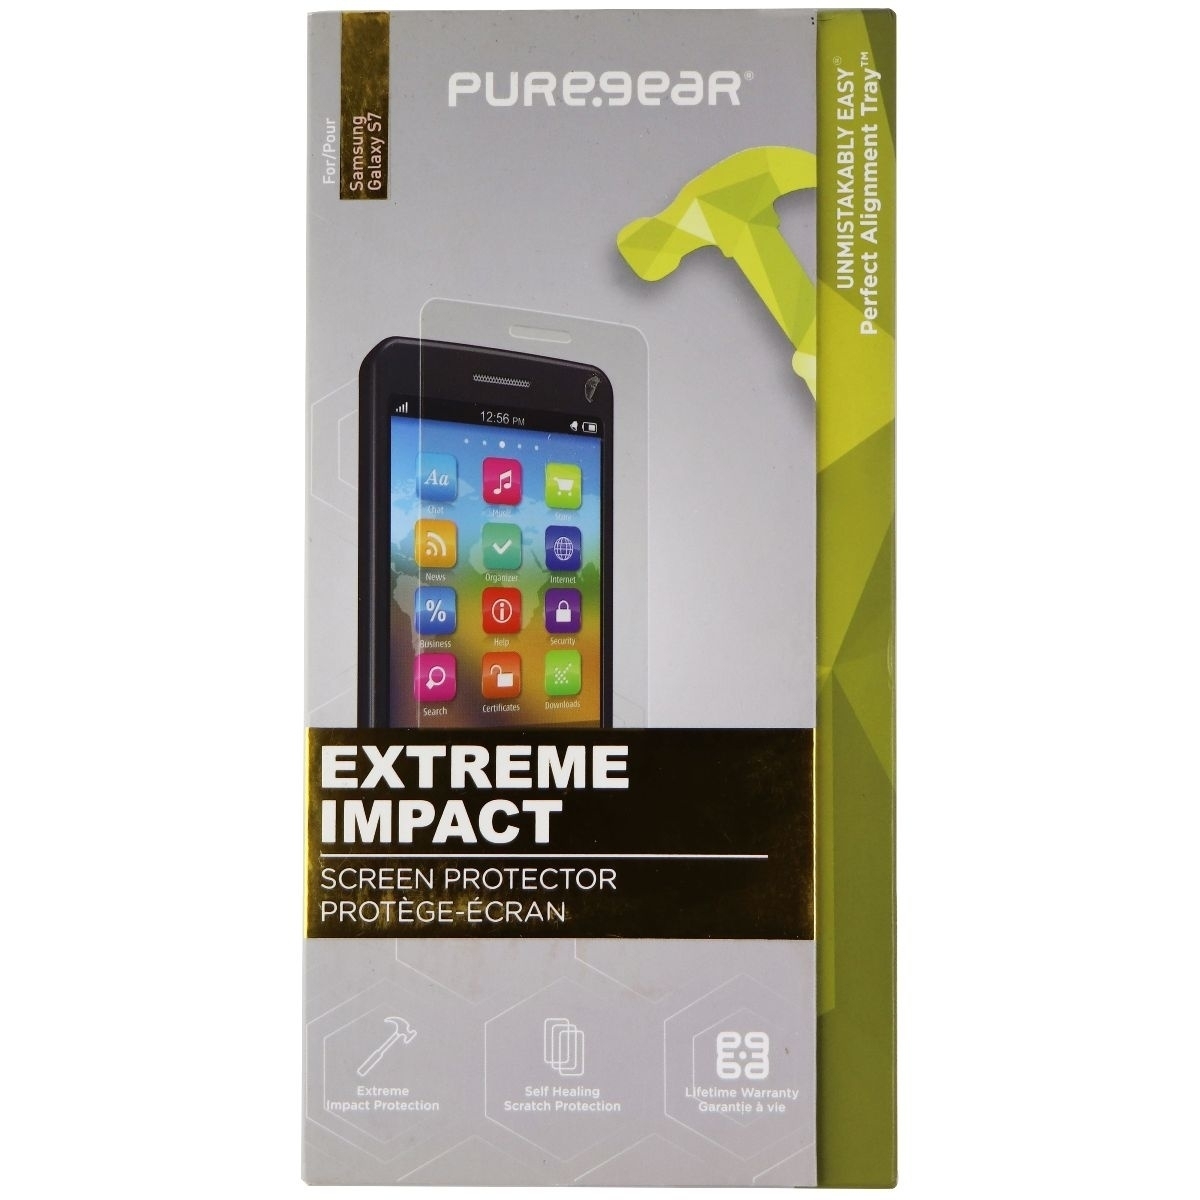 PureGear Extreme Impact Screen Protector Kit For Samsung Galaxy S7 - Clear